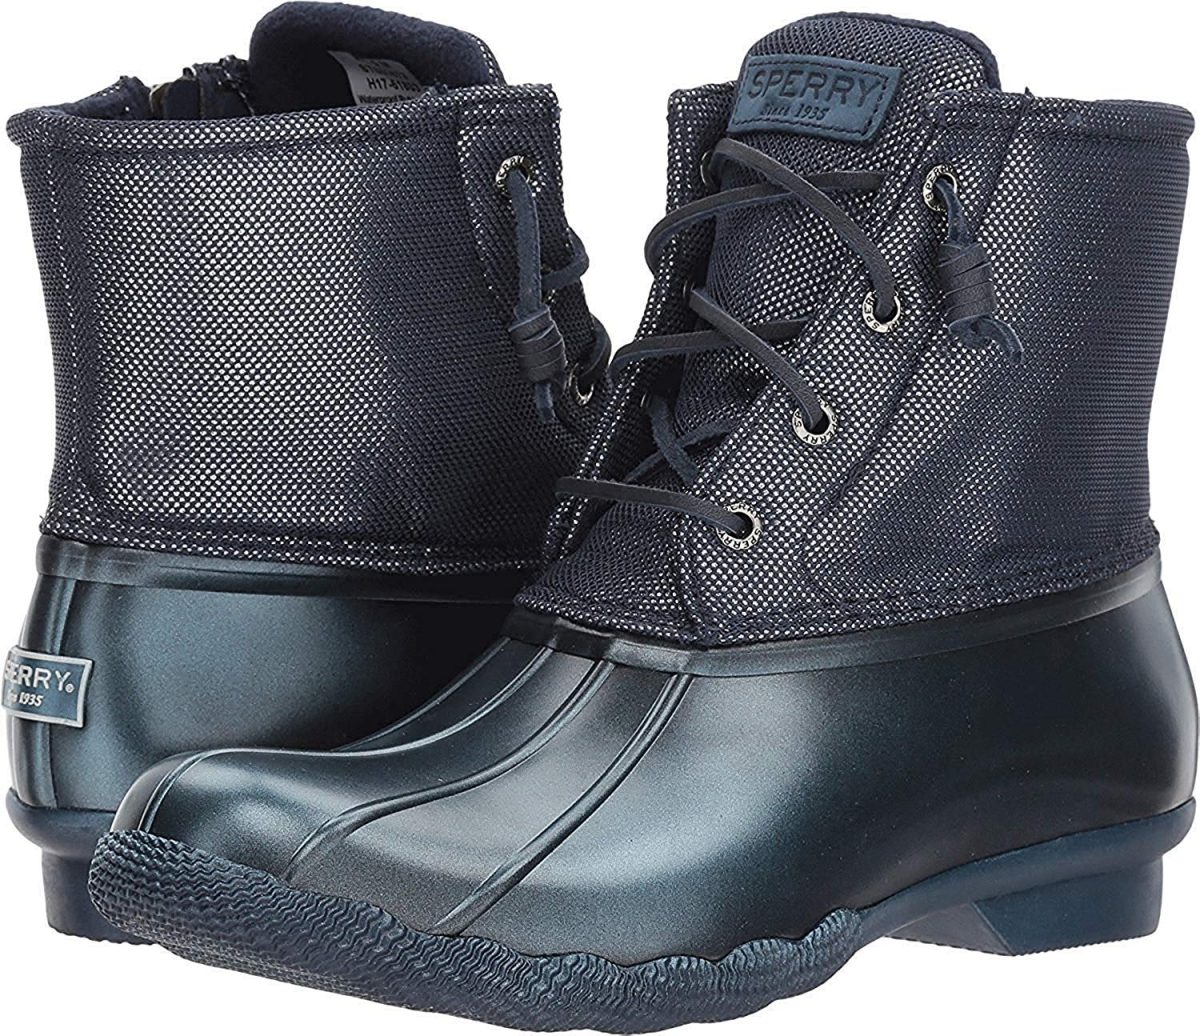 The 10 Best Waterproof Boots According To Travel Editors | TouristSecrets